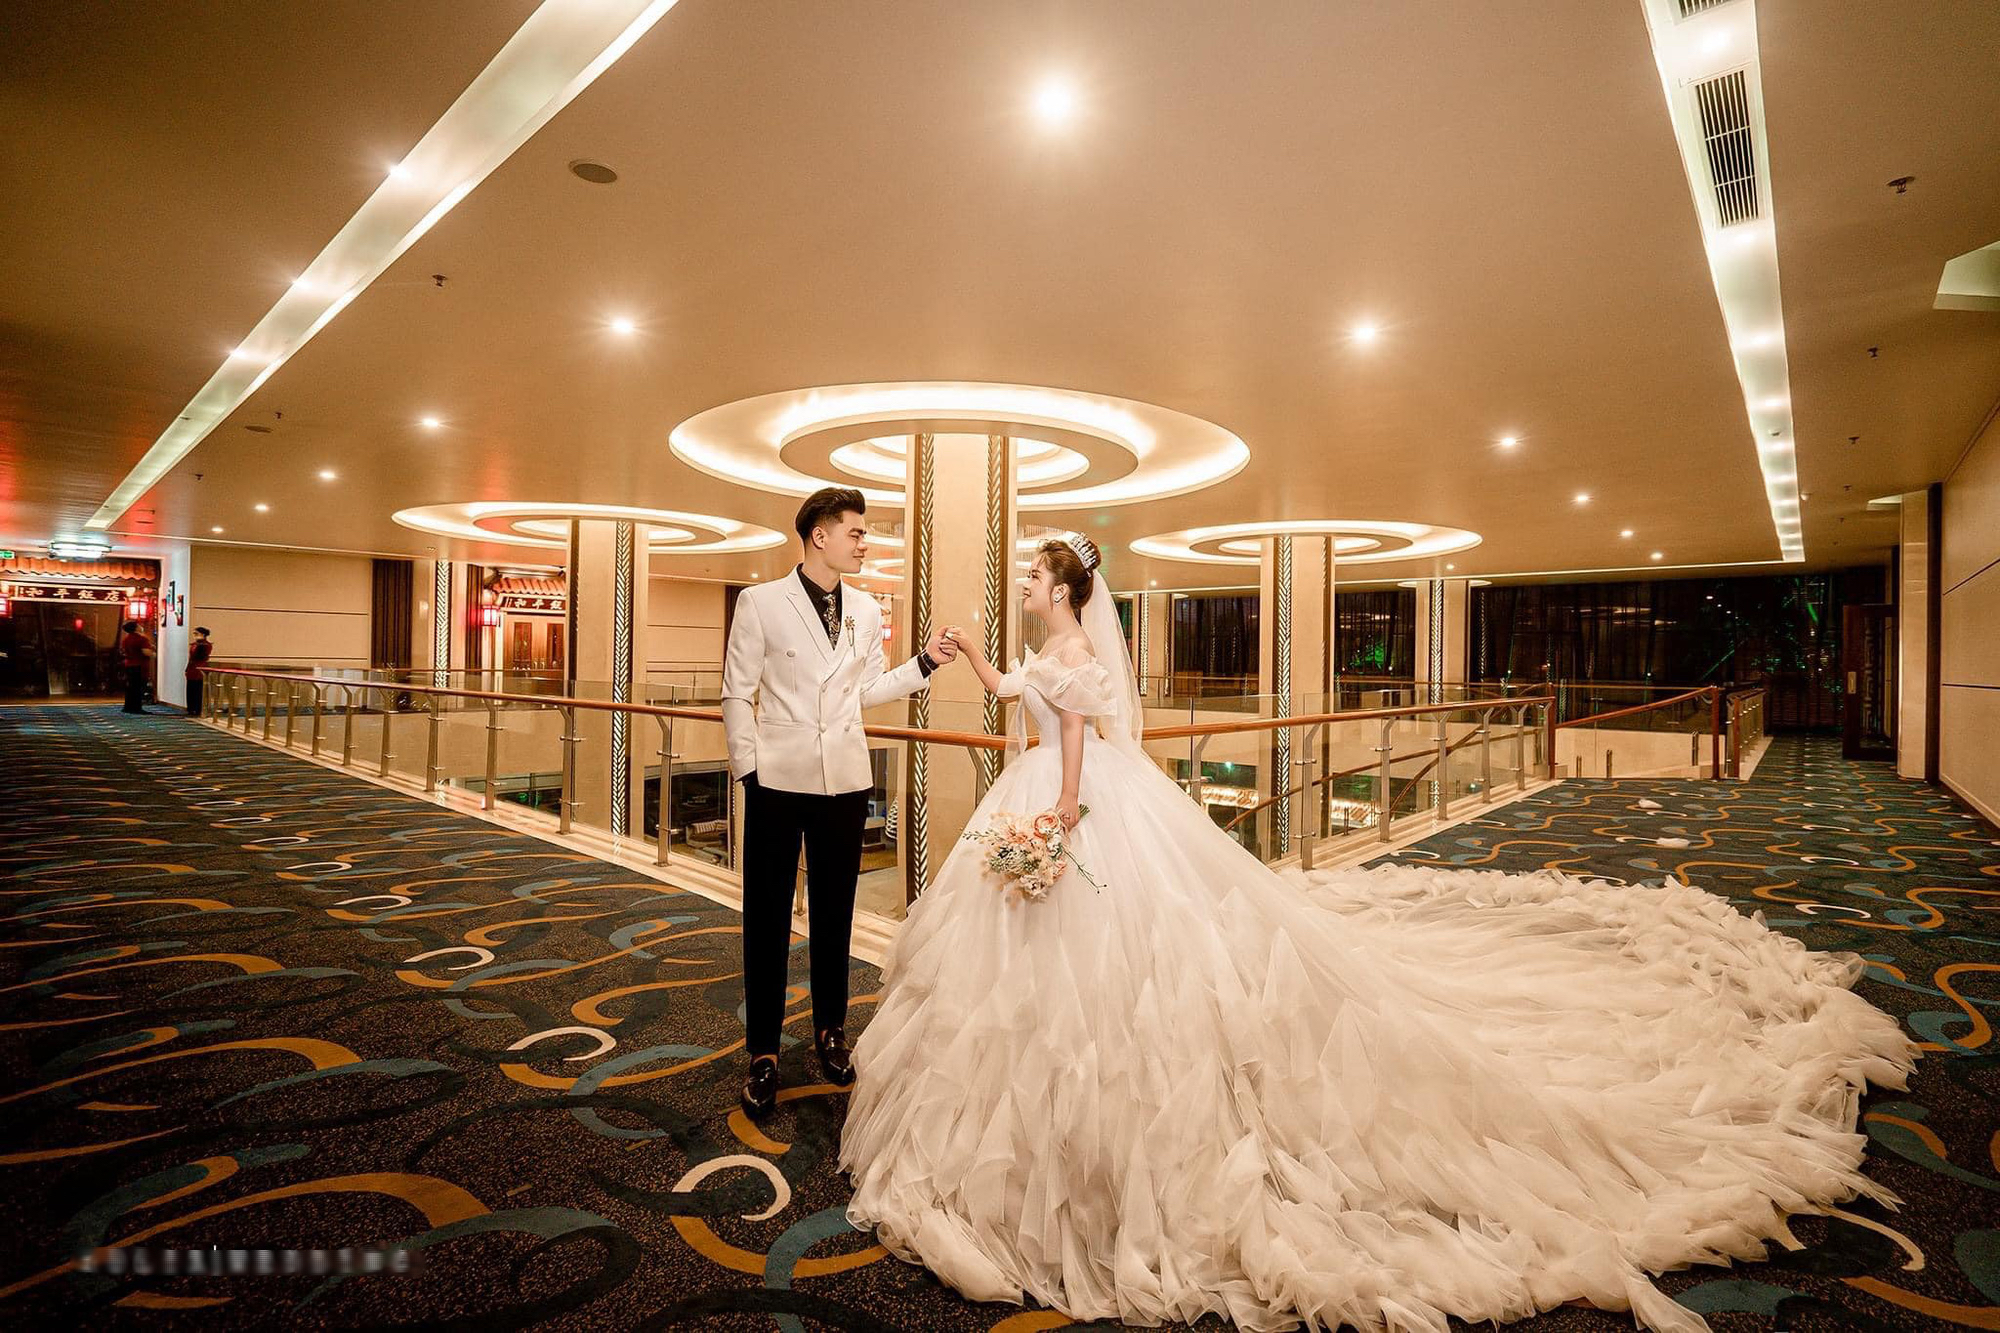 Just known for a month, the fashion shop owner married a 20-year-old beautiful girl: Everyone thought that the wedding newspaper was a joke, the mother-in-law comfortably let her daughter-in-law wake up at 9 am!  - Photo 5.